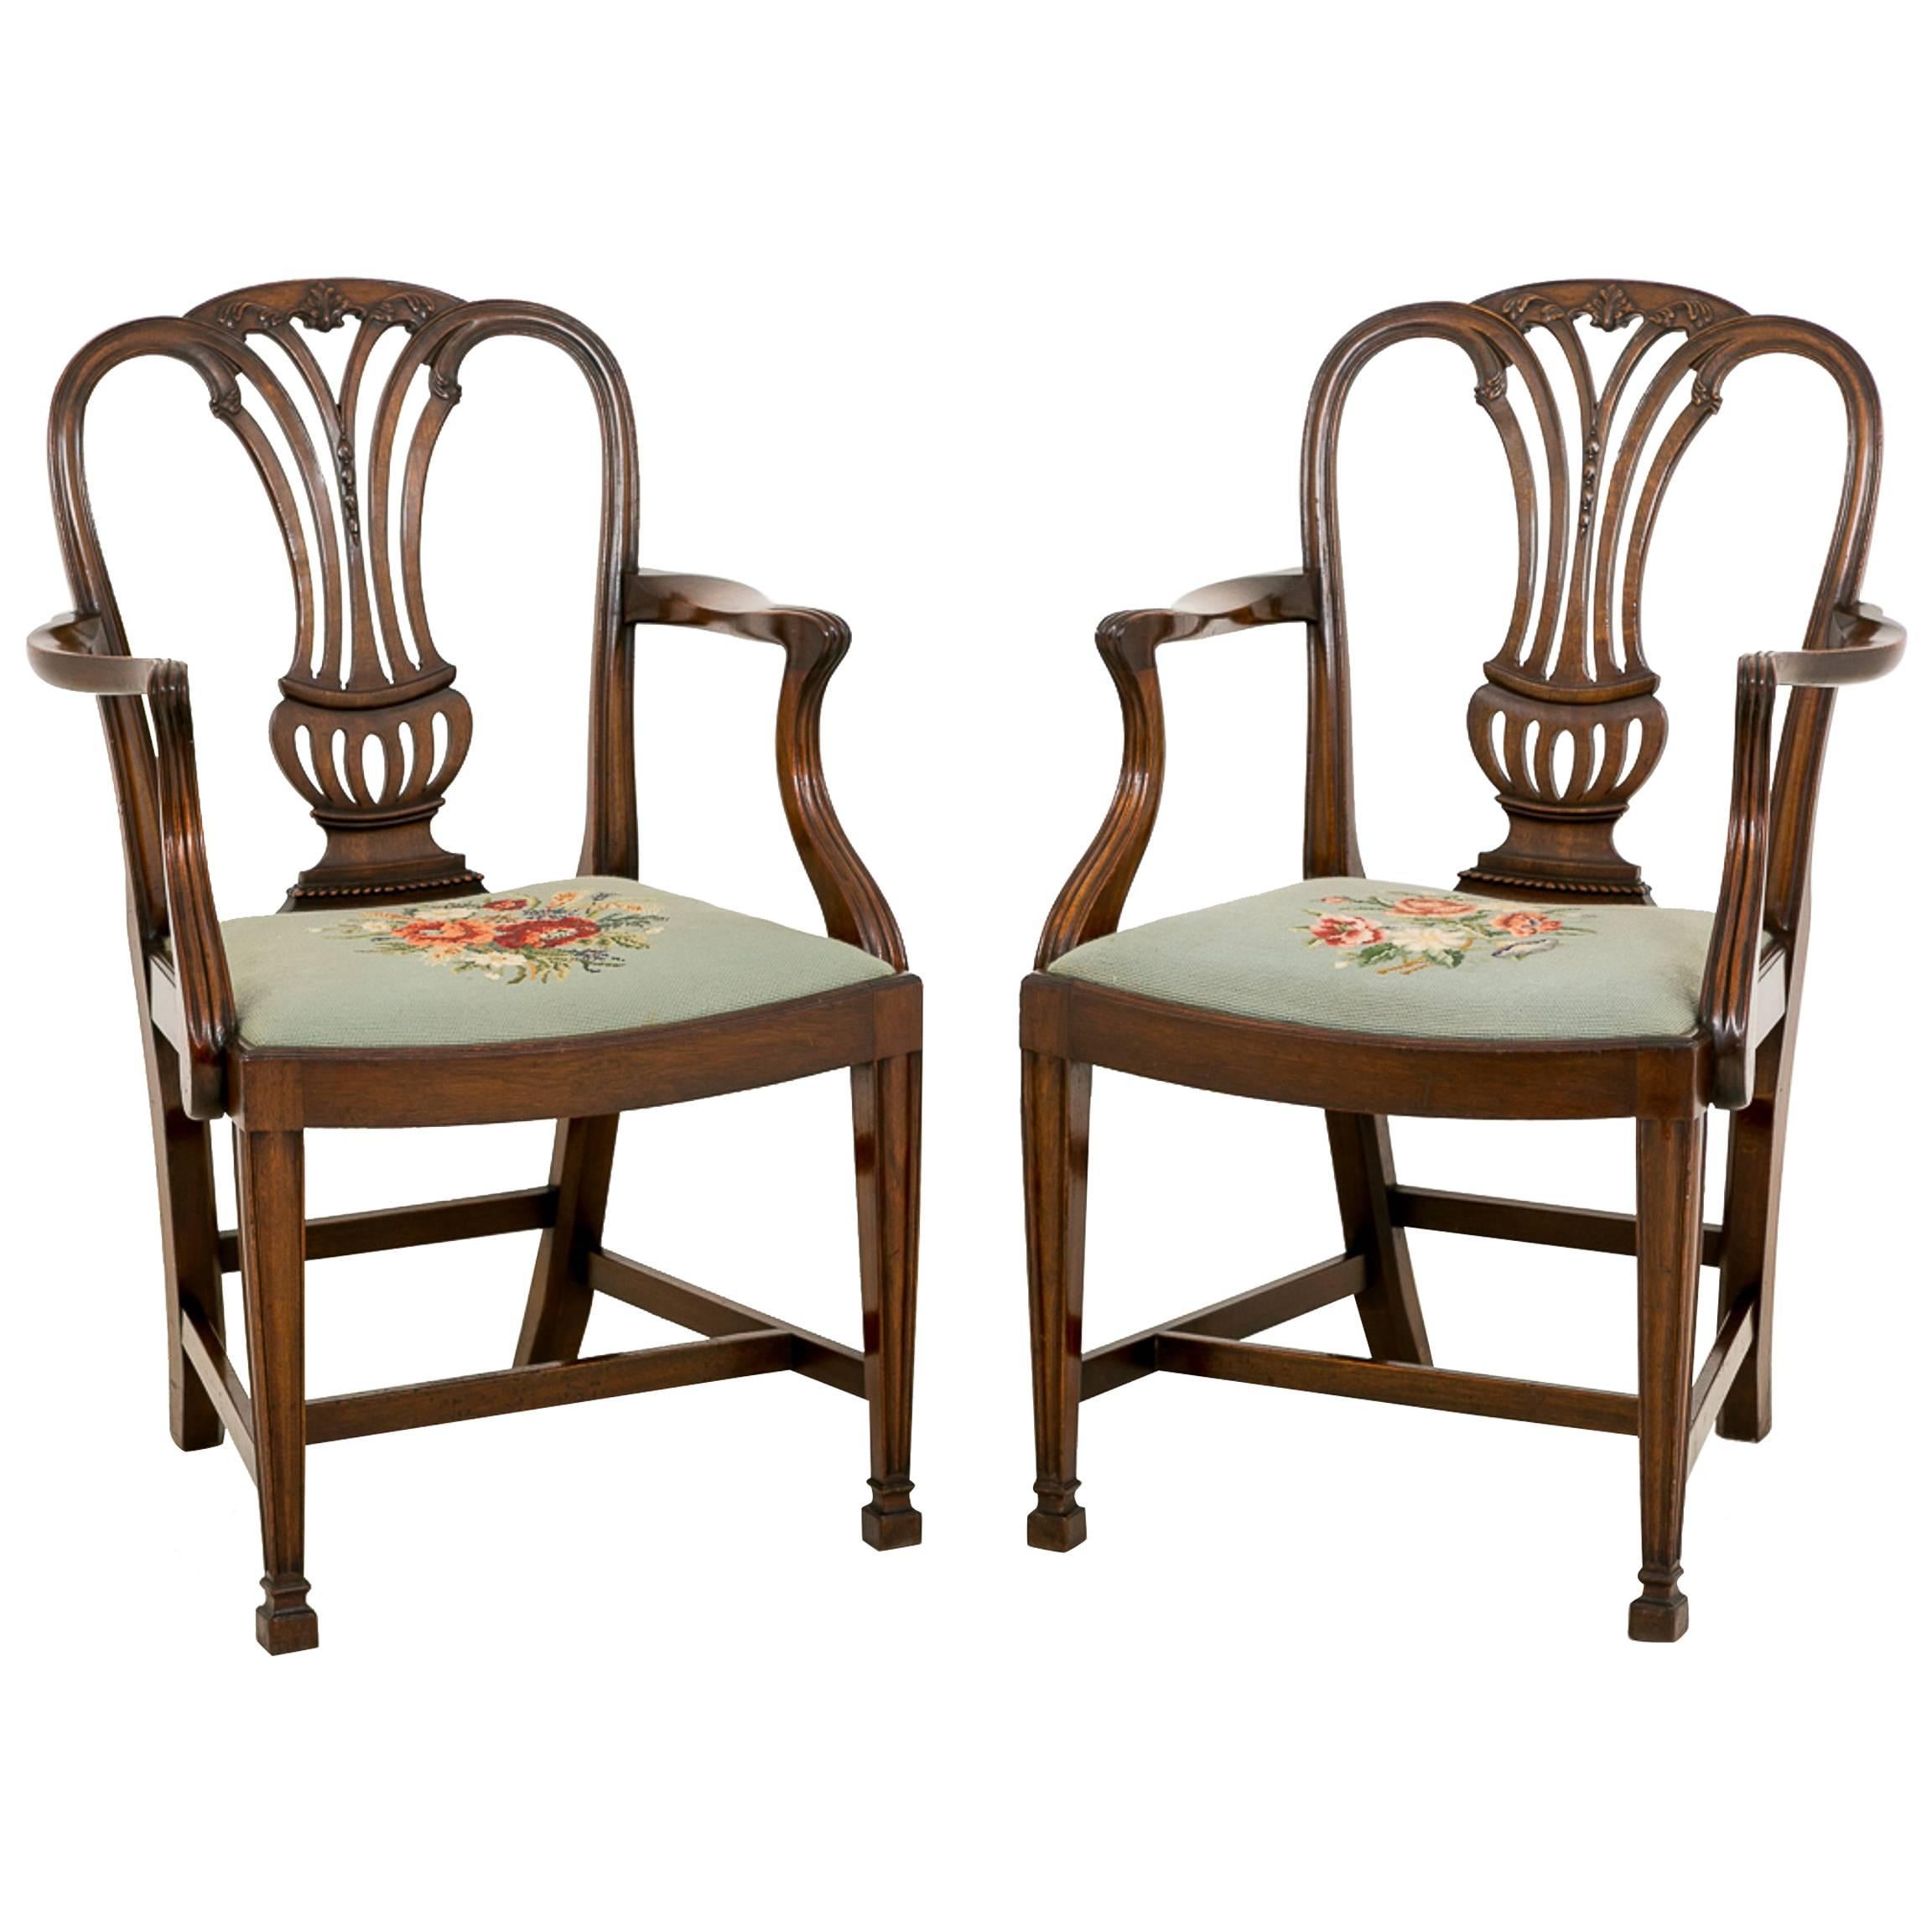 Pair of Mahogany Hepplewhite Influenced Carver Chairs For Sale